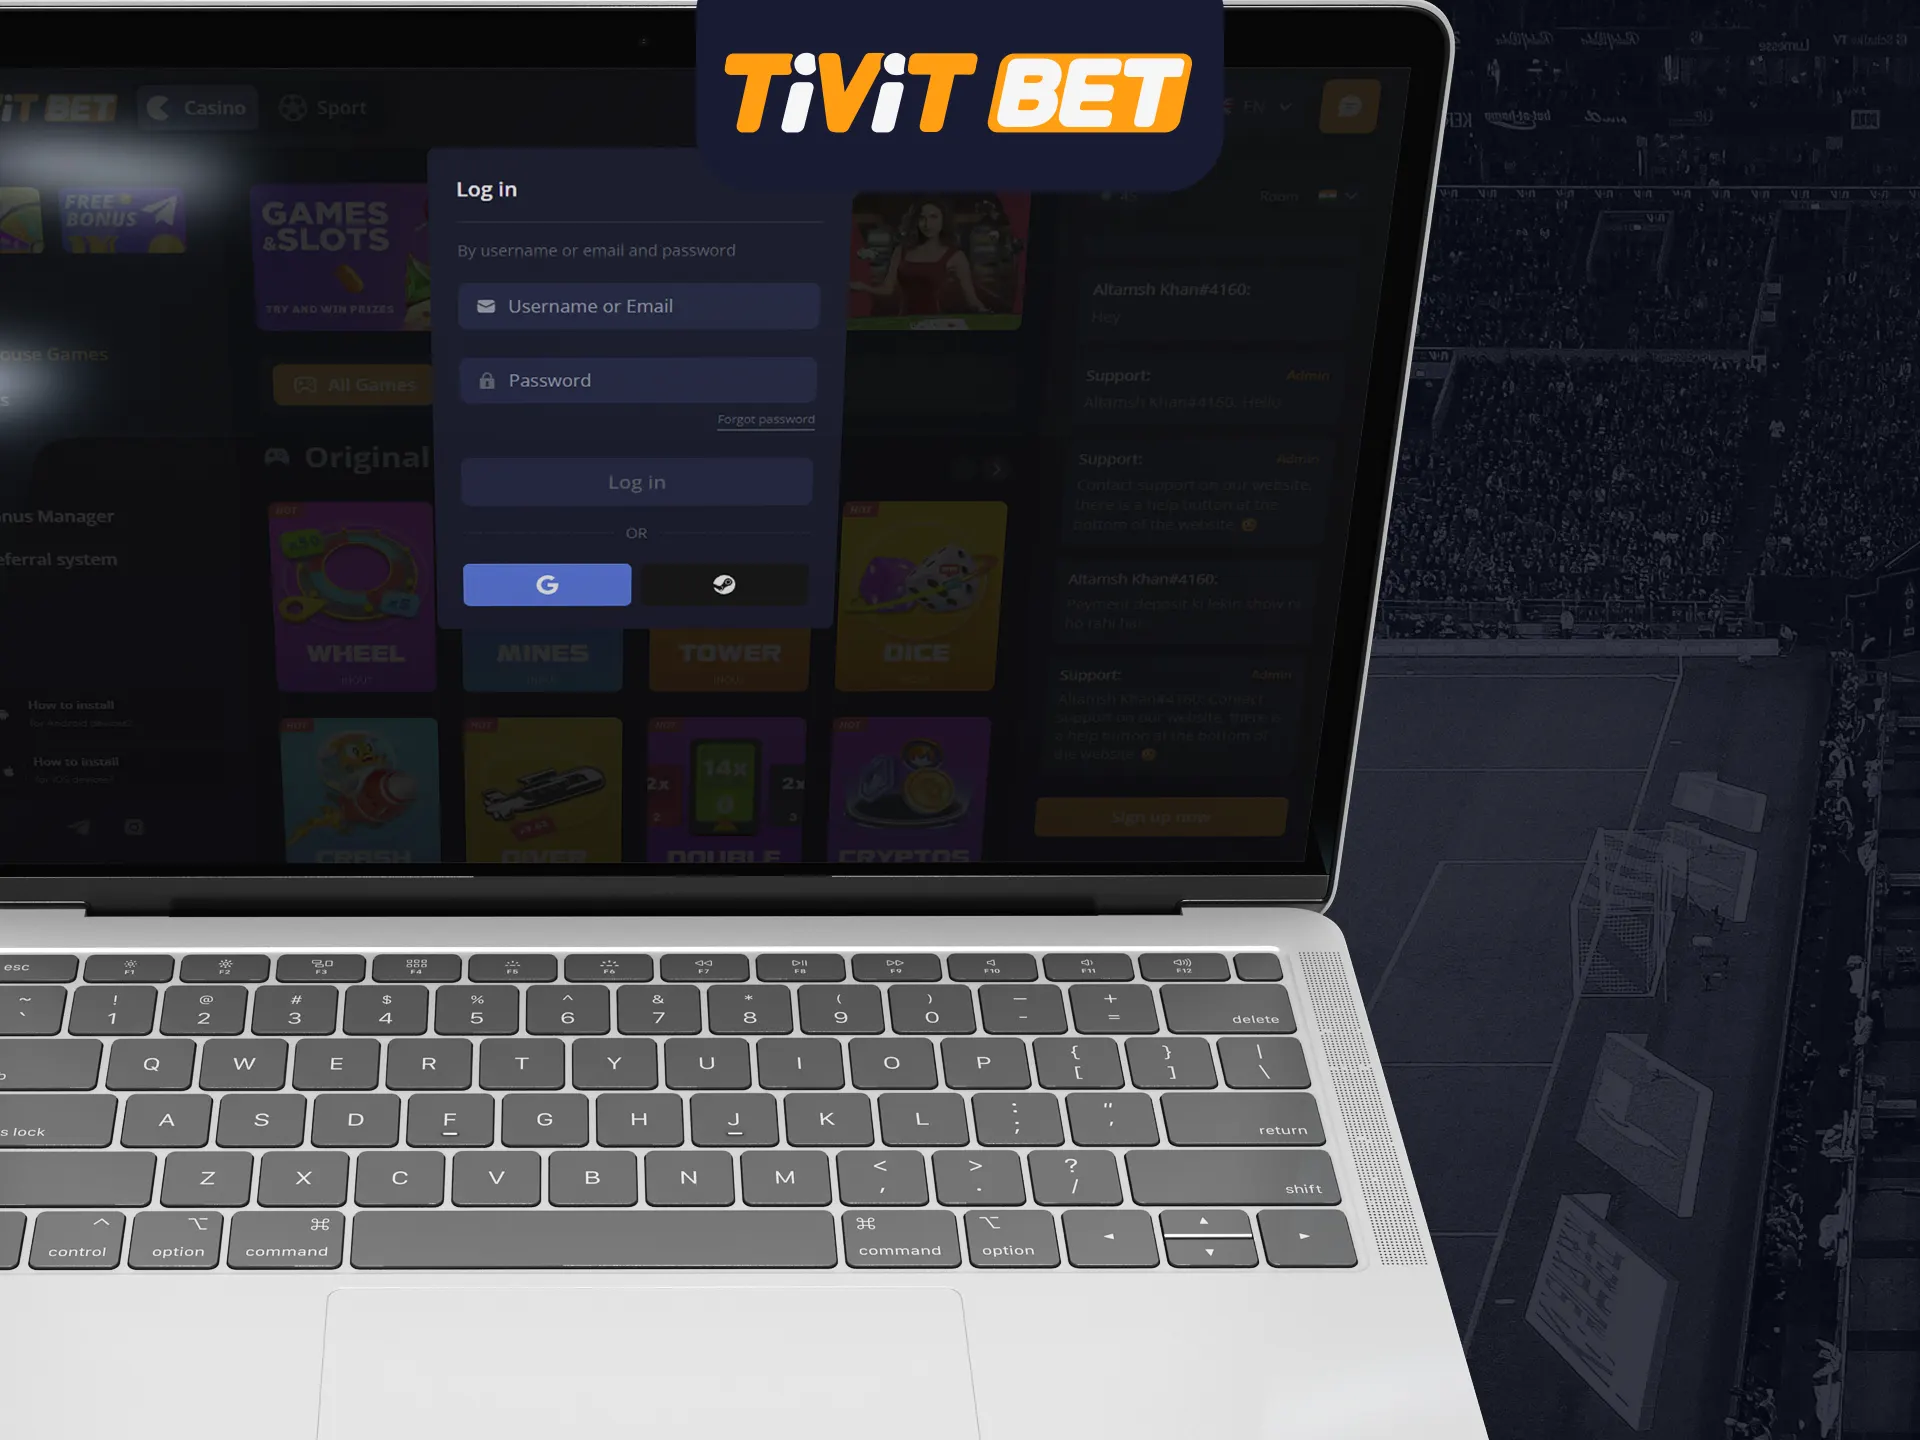 To log in to Tivit Bet, you need to enter your username and password.